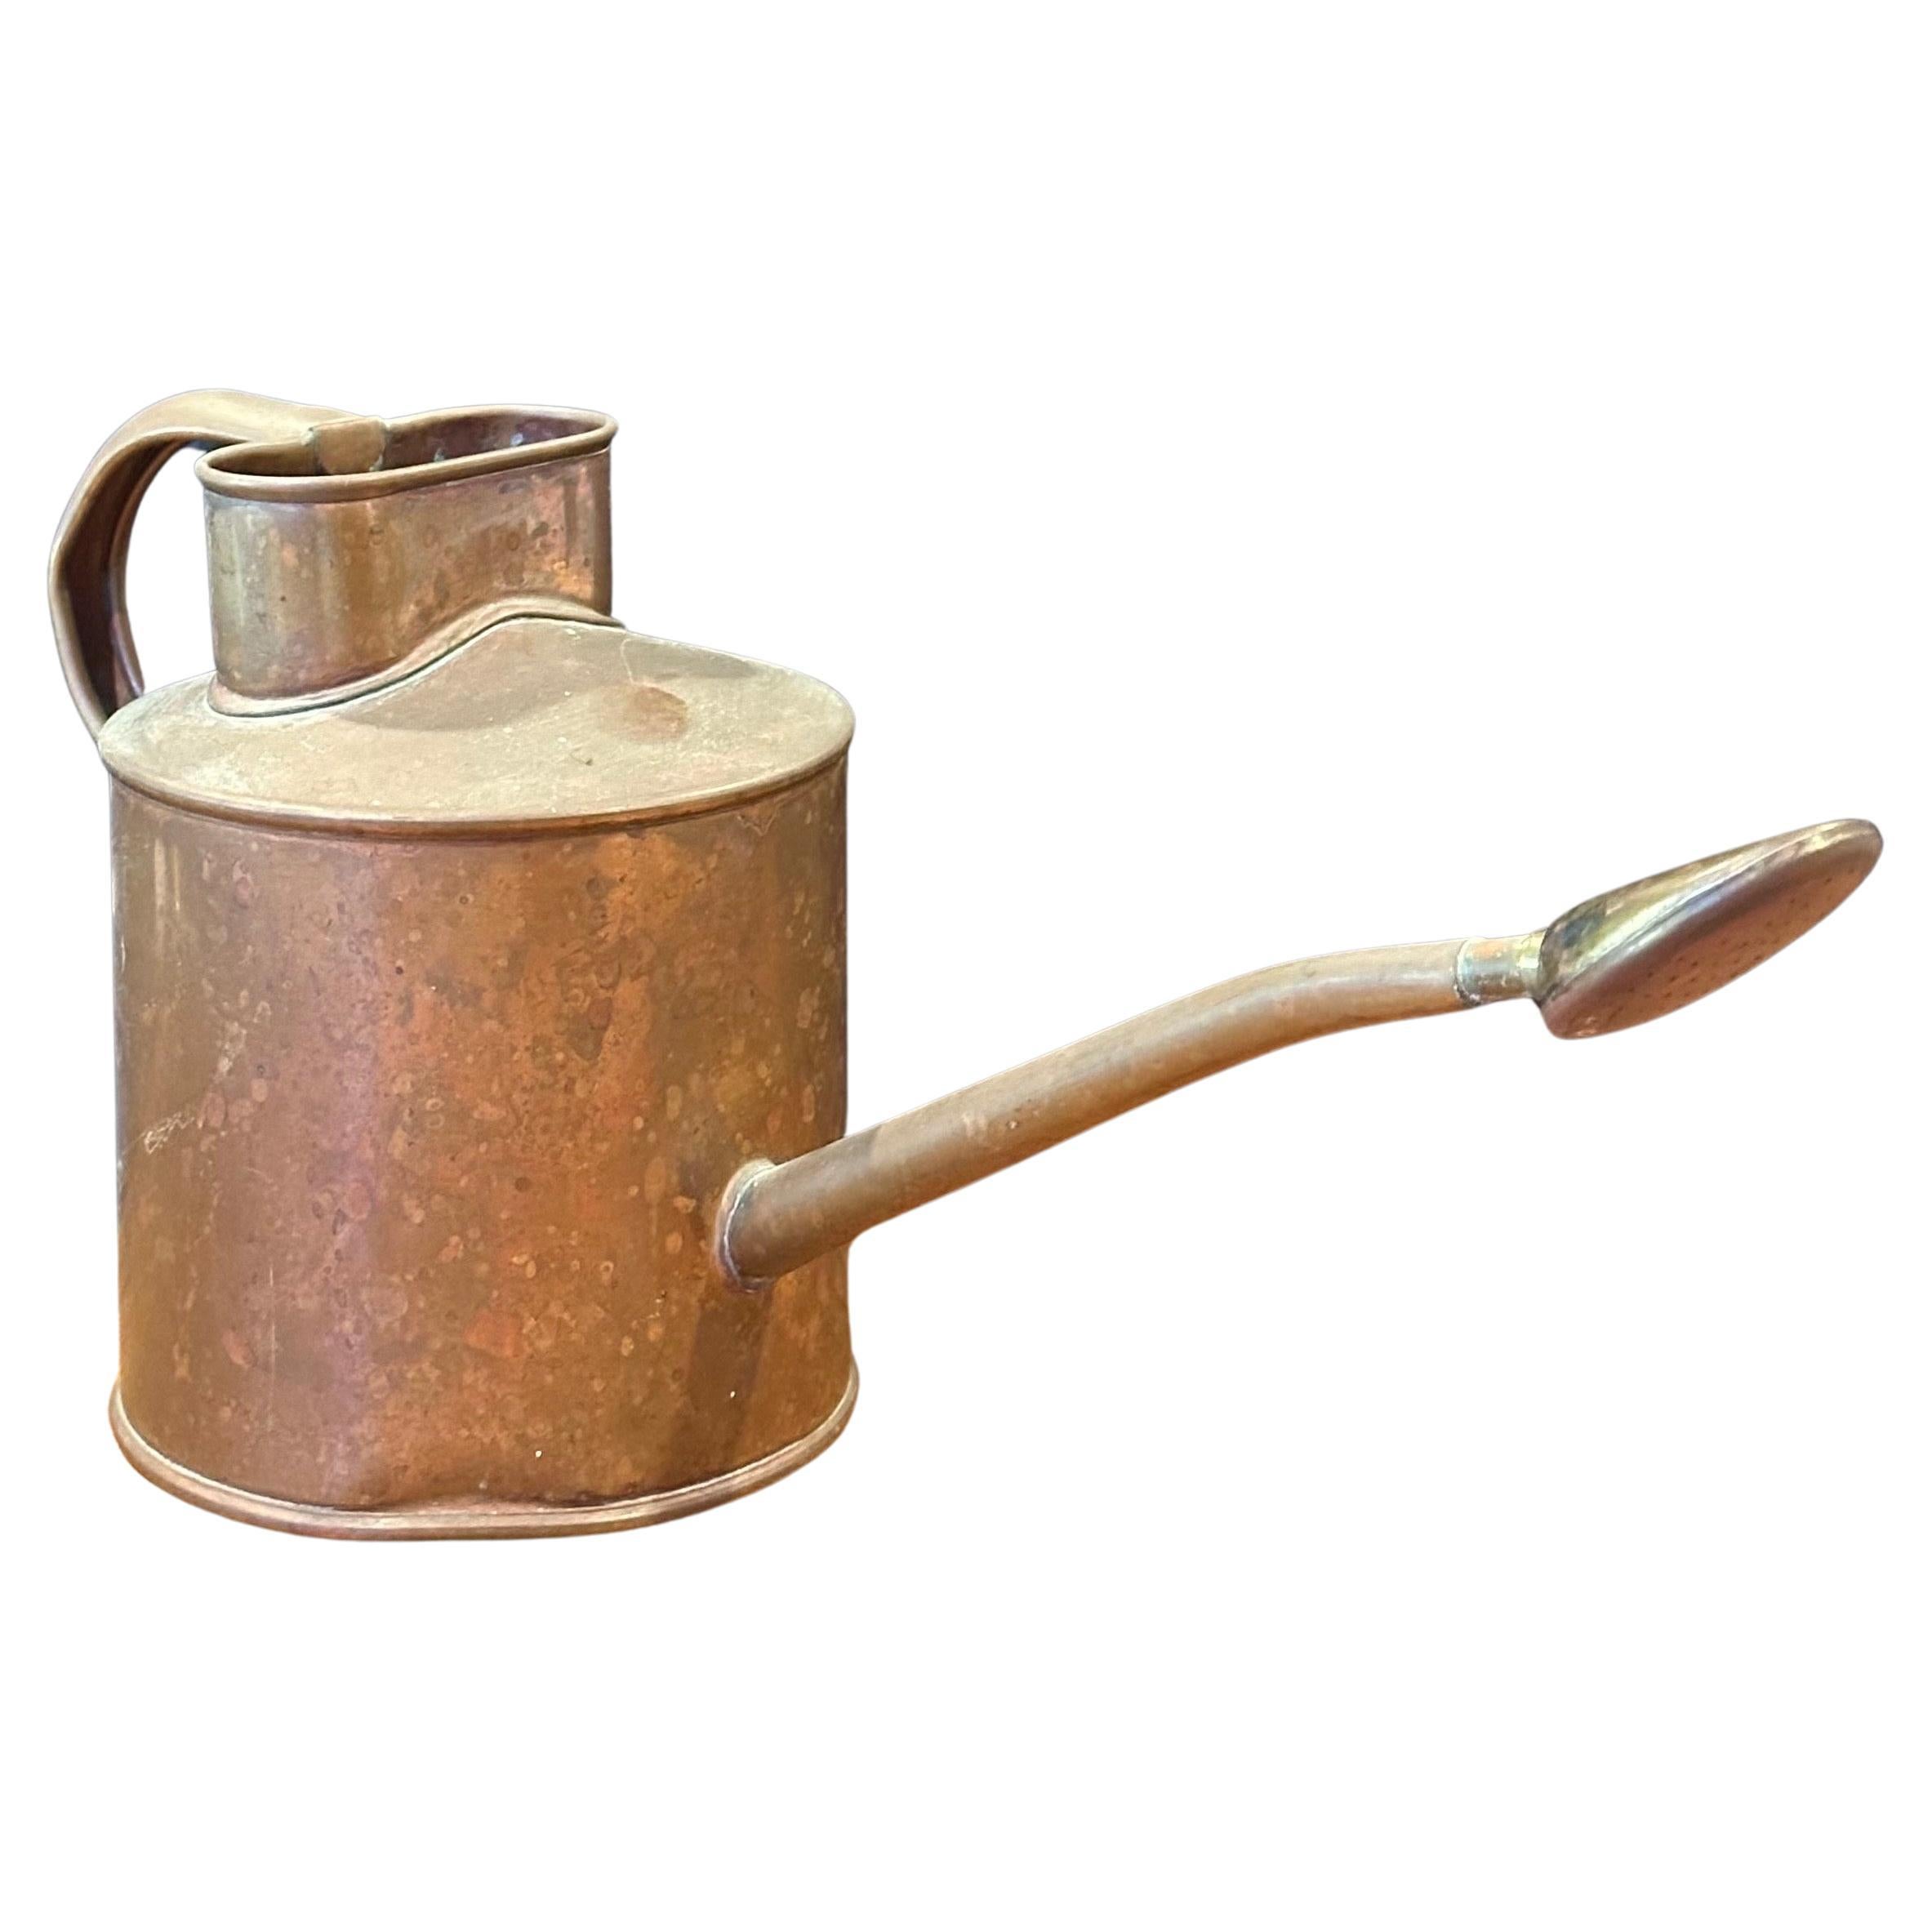 A charming mid-century copper watering can by Brookstone, circa 1990s. The can is in good vintage condition with a removable spout and measures 5.5